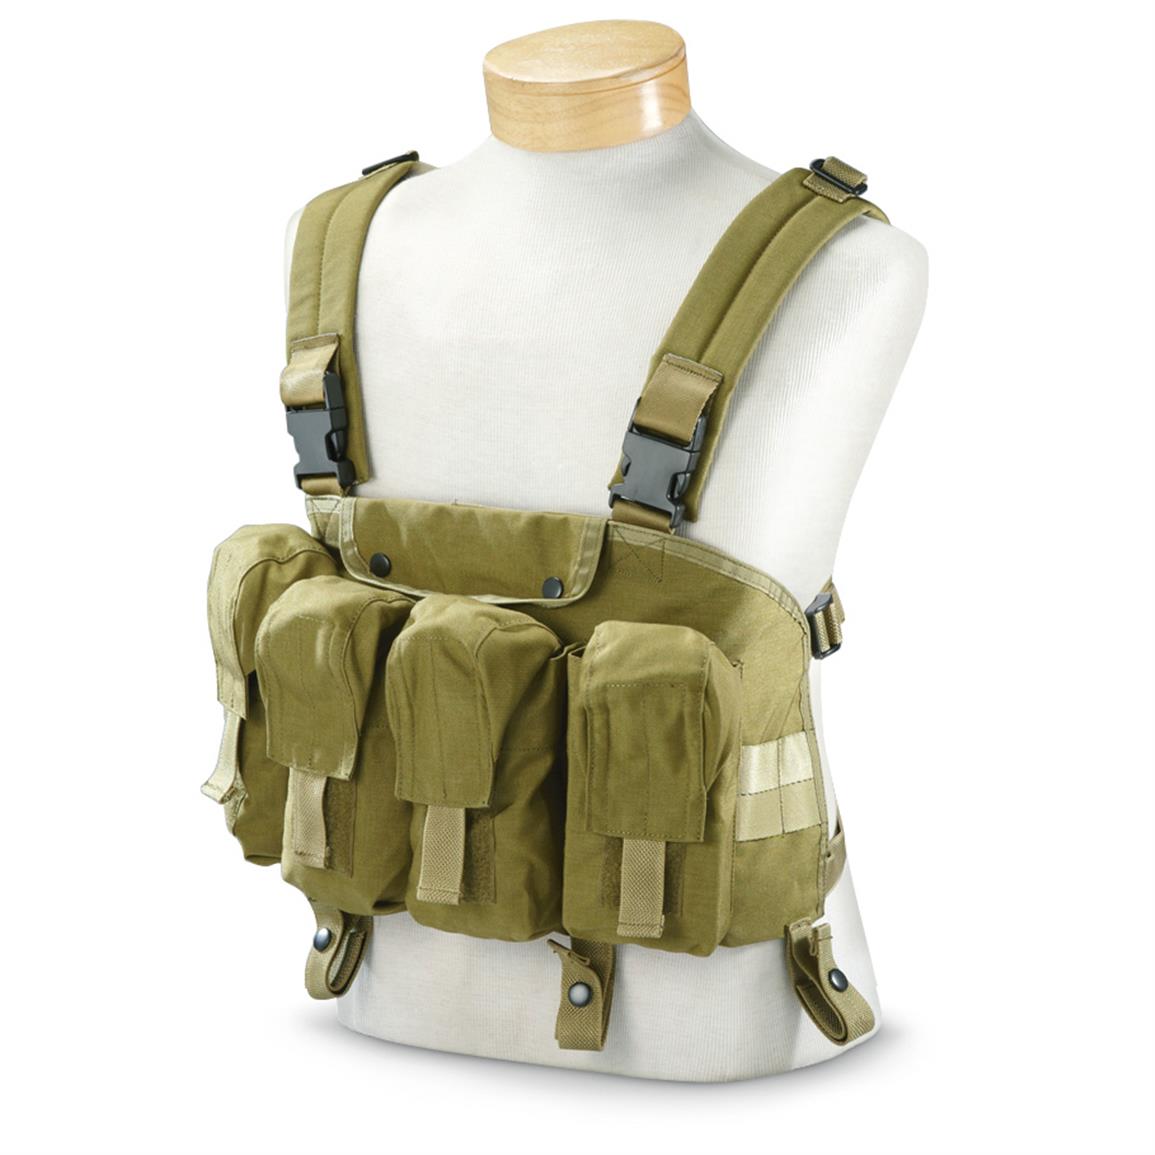 Military-style 4-pocket Chest Rig - 622938, at Sportsman's Guide